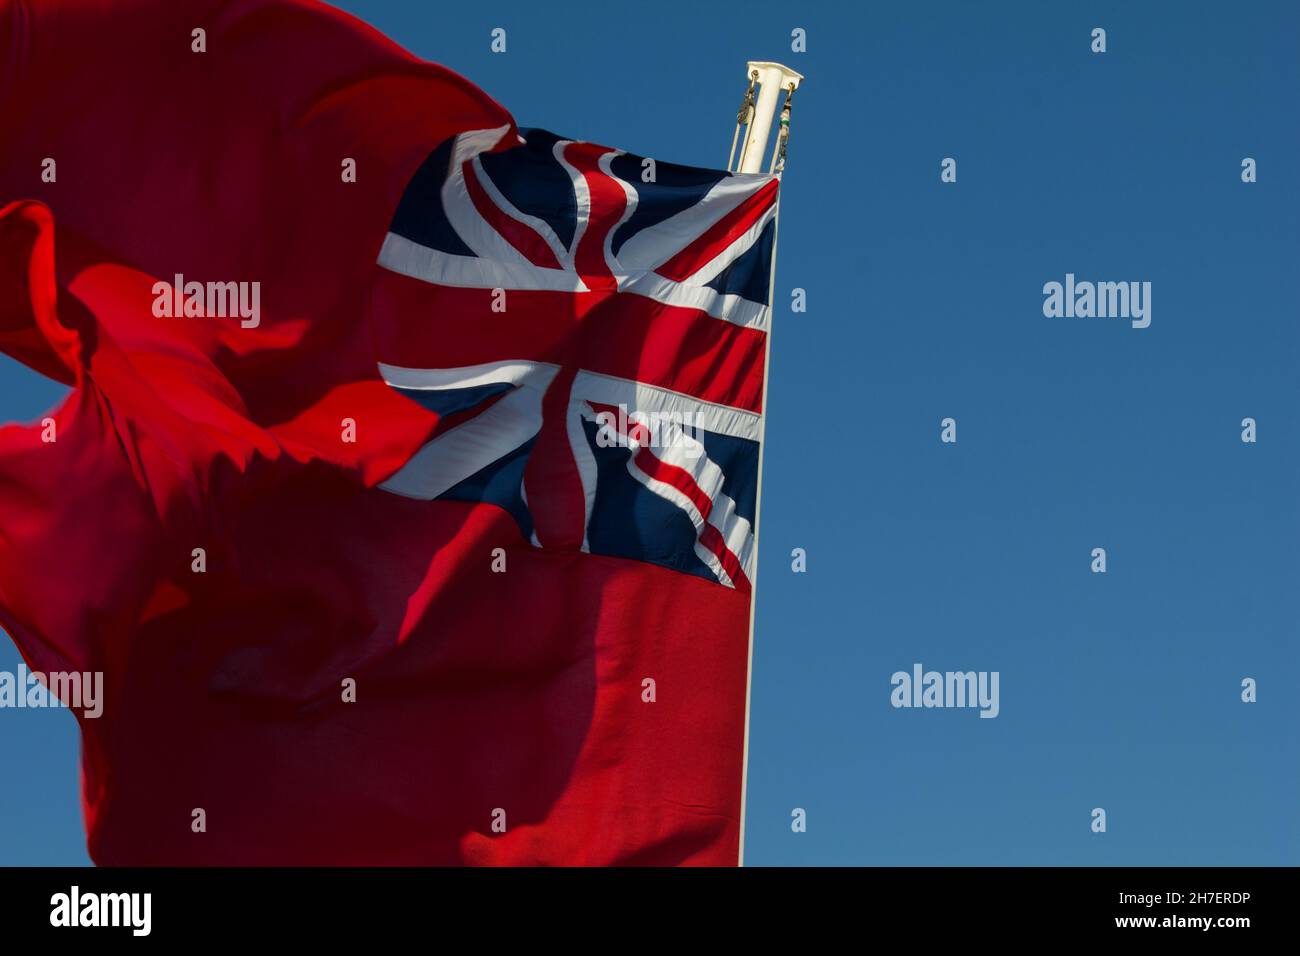 Red Ensign flag also known as the Red Duster.  Flown by British merchantman or civil ships. Stock Photo